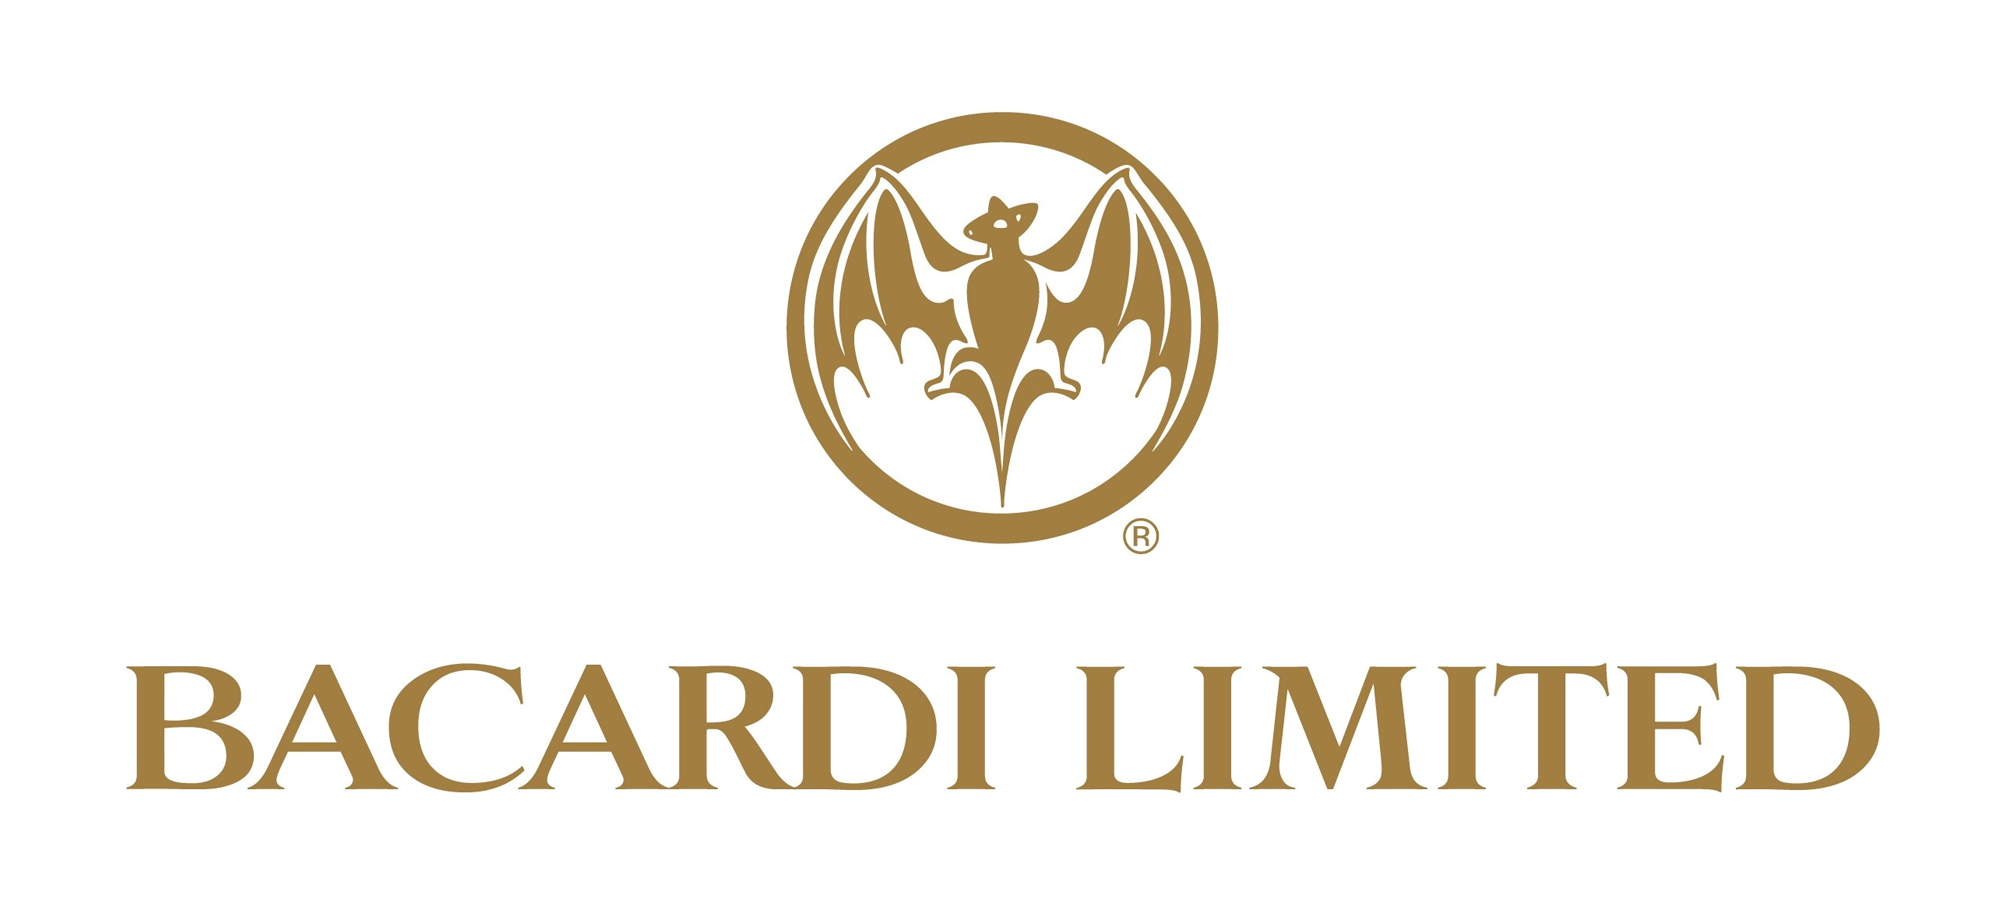 Bacardi Limited, the largest 